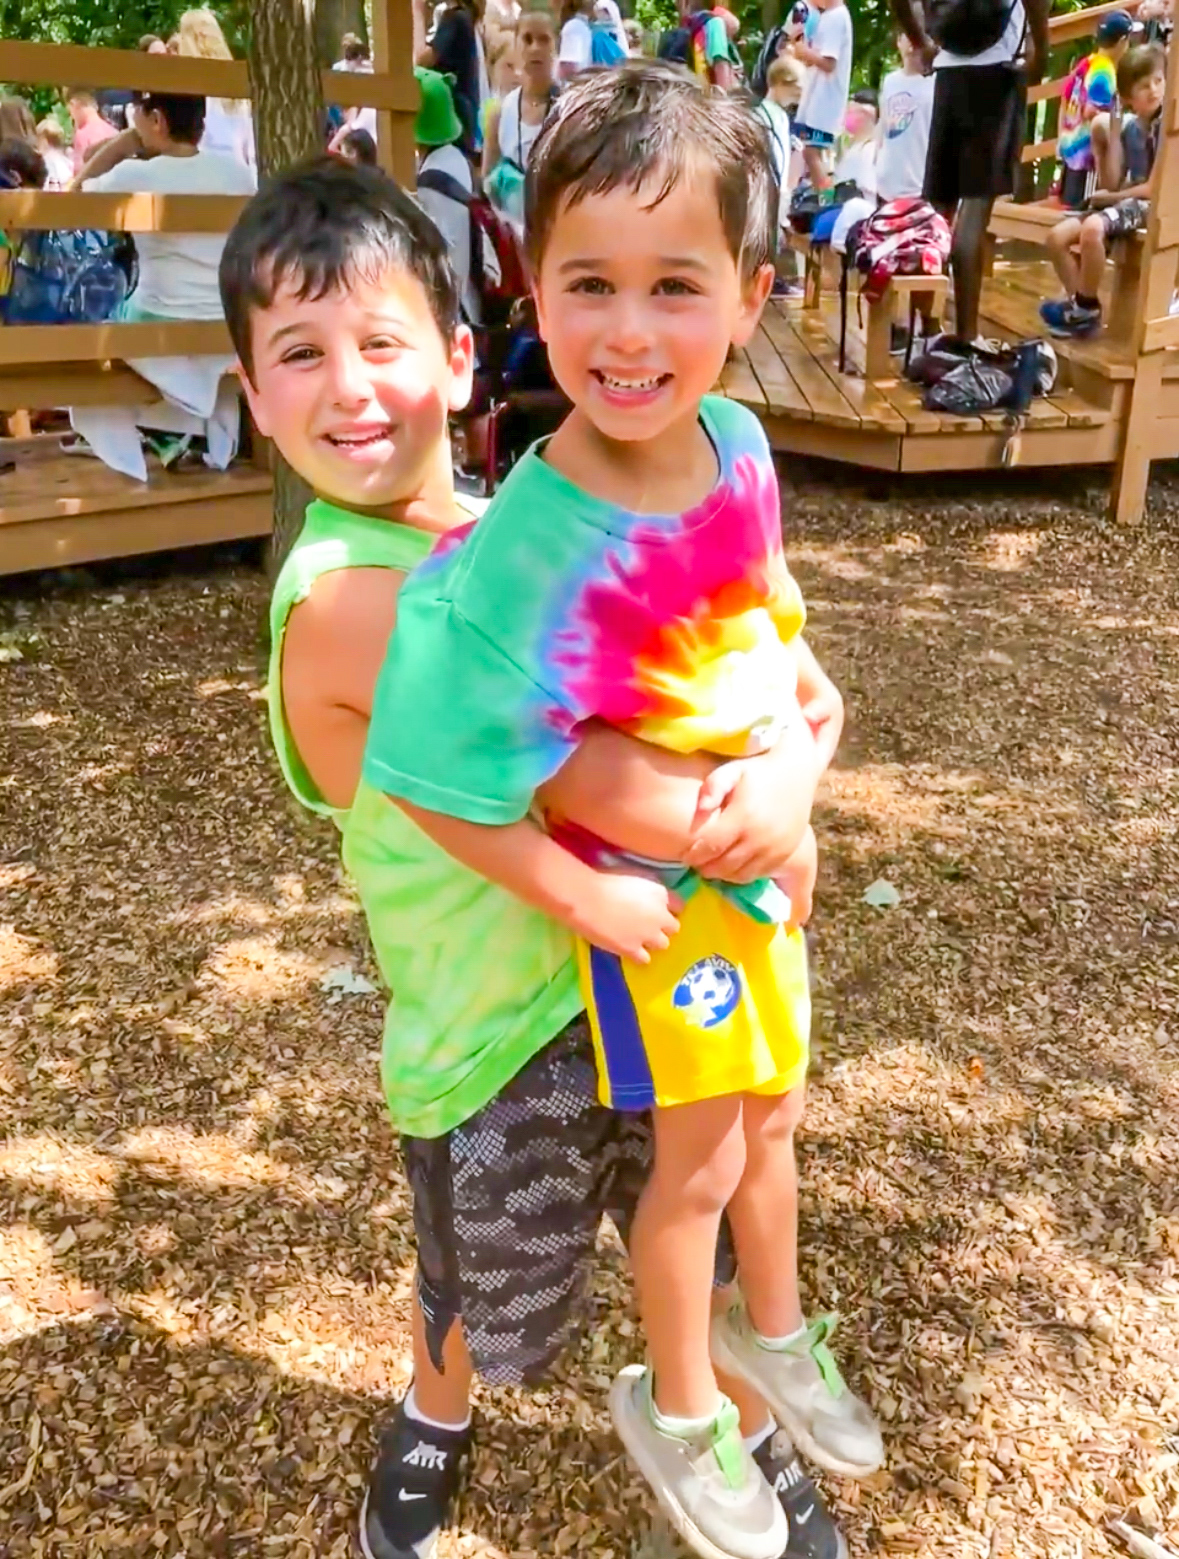 Brody and Levi in front of the Bannerama benches // In this post, I'm highlighting the long-lasting traditions, like theme days, that make Banner Day Camp a beloved summer camp in Chicago's North Shore & beyond.